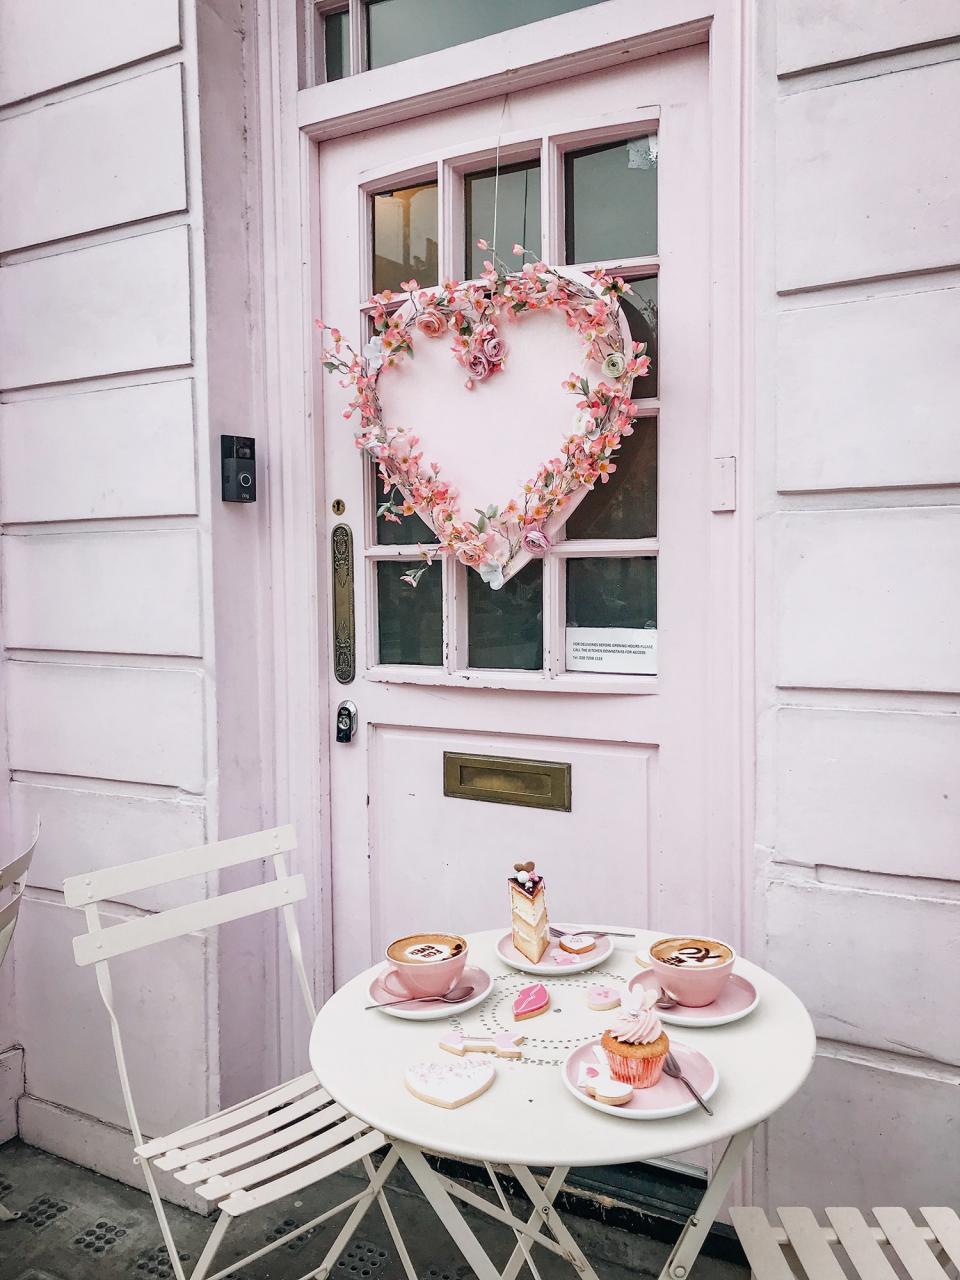 Peggy Porschen in Belgravia. “I know everybody's gone crazy for it on Instagram,” says Ferguson, “But hand on heart, if you're going to have the calories and treat yourself to a cupcake, definitely without a shadow of a doubt, go there.”